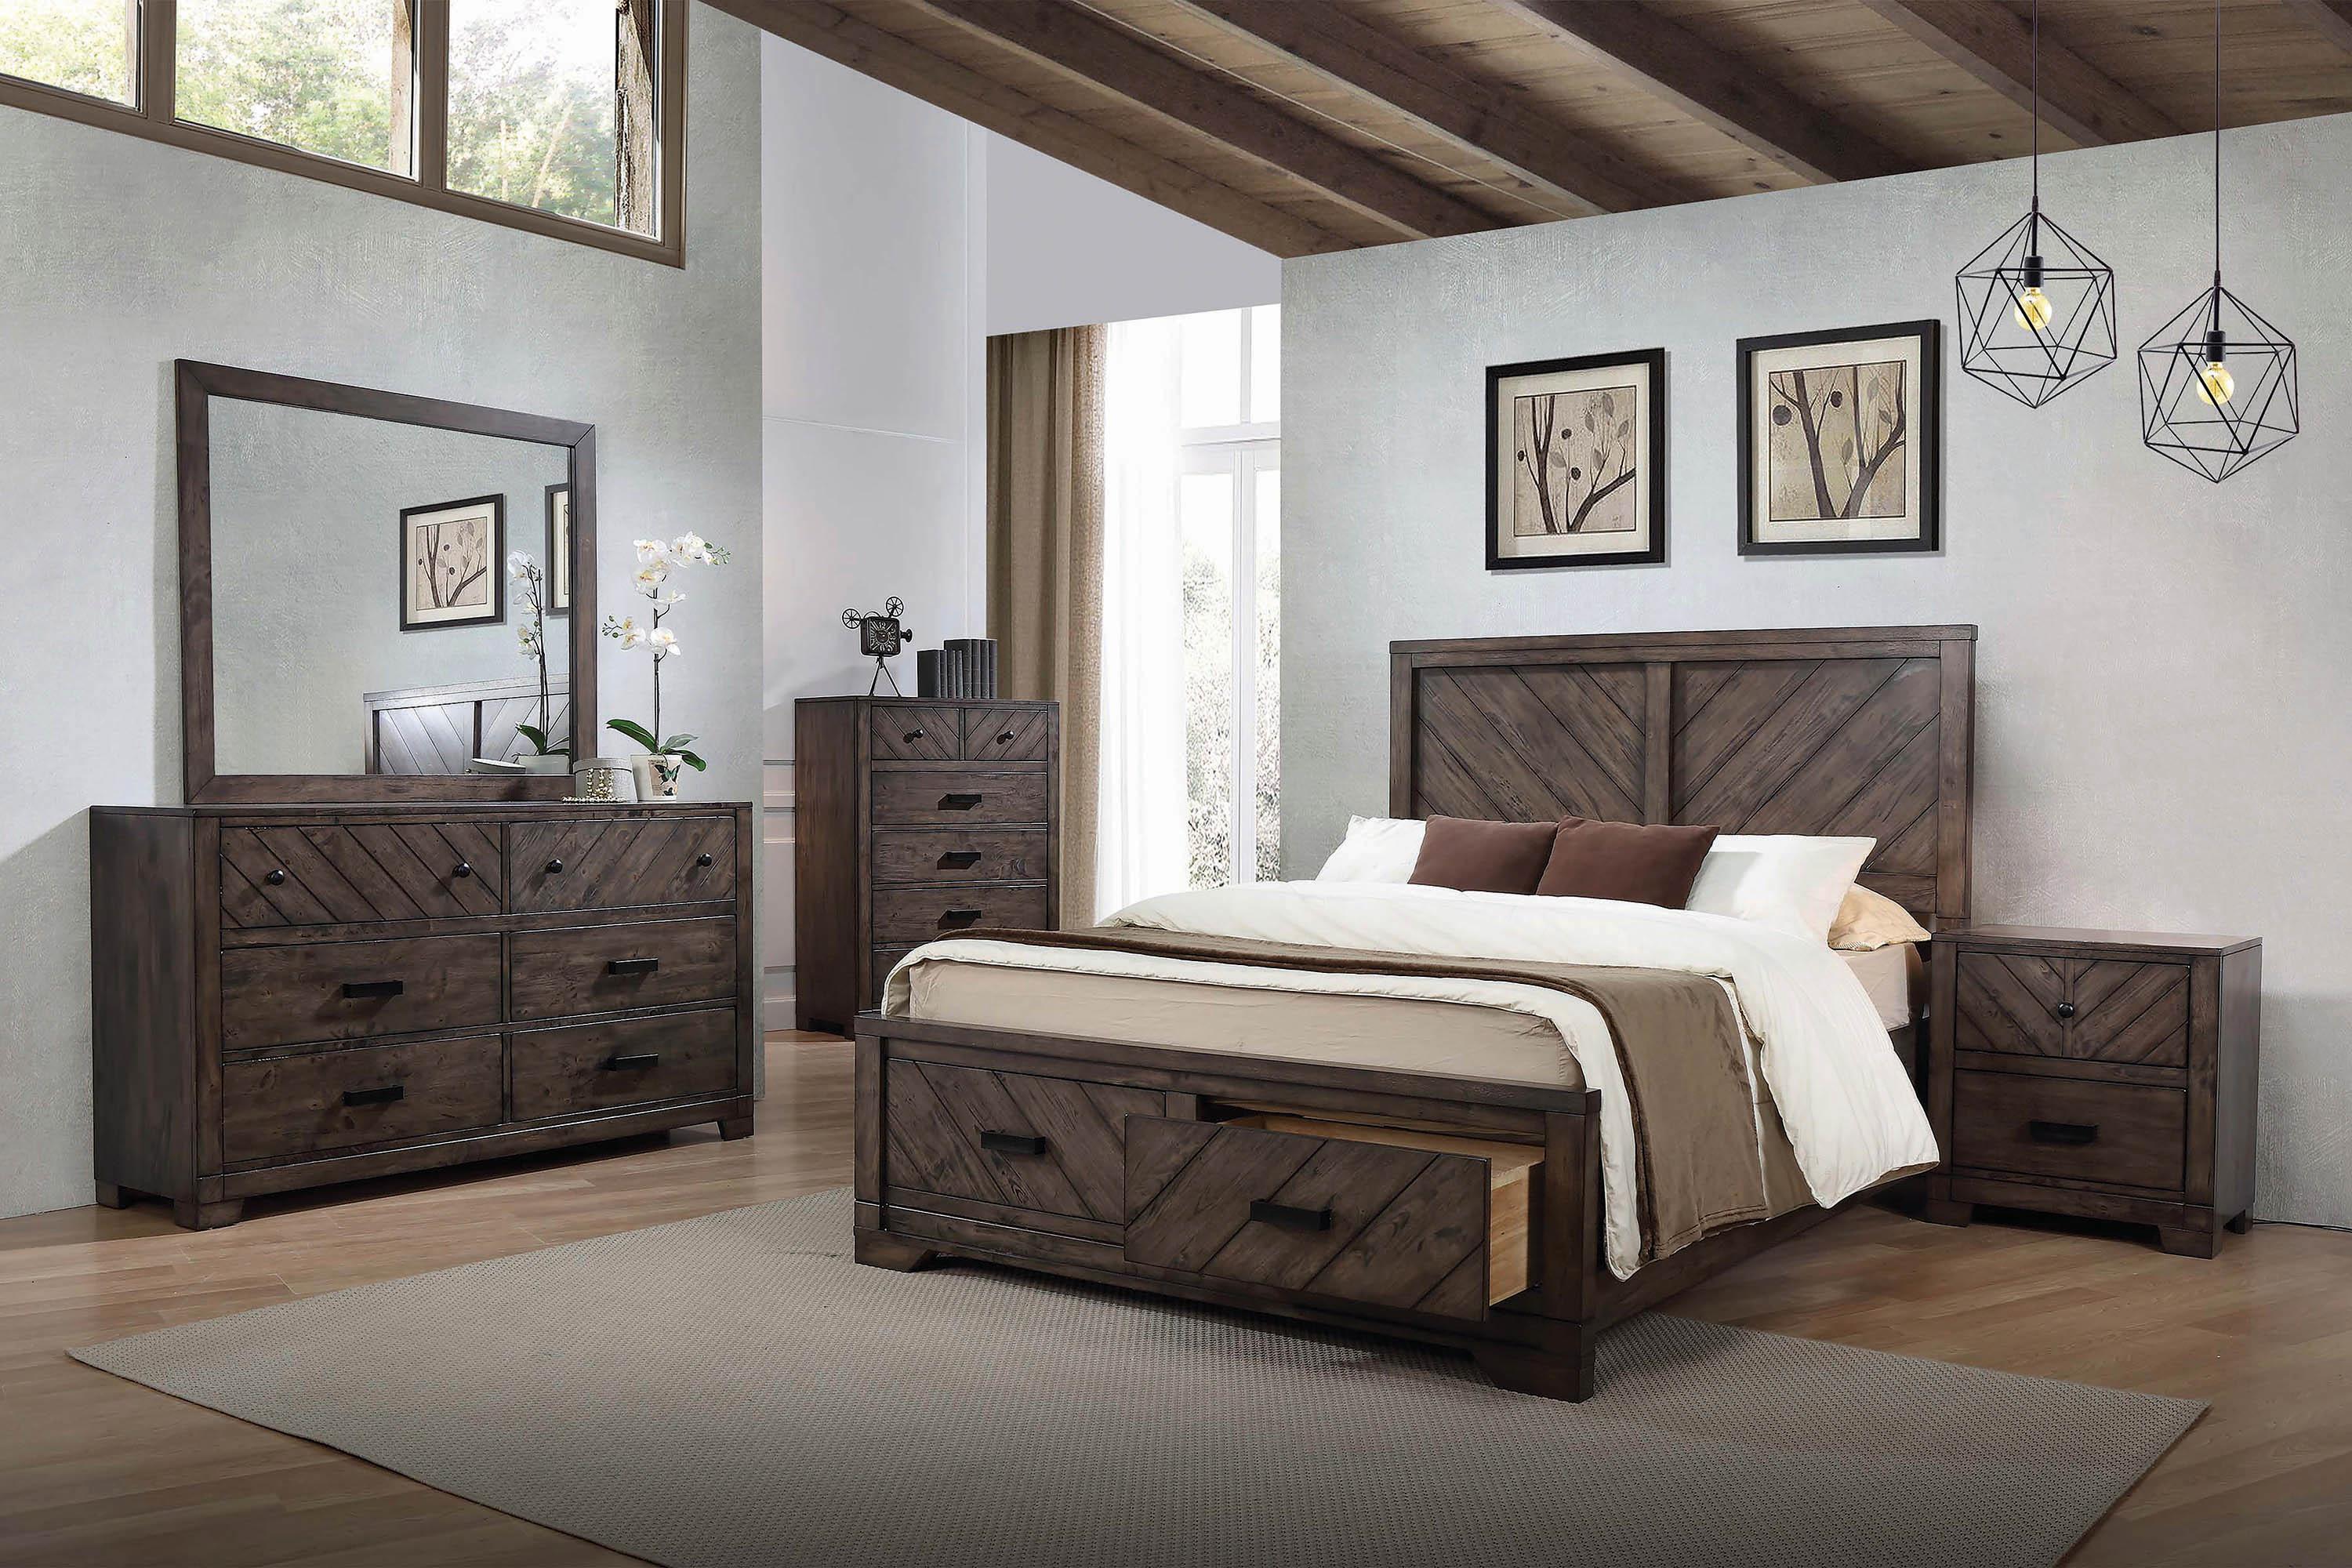 

    
Traditional Brown Wood E king bed by Coaster
